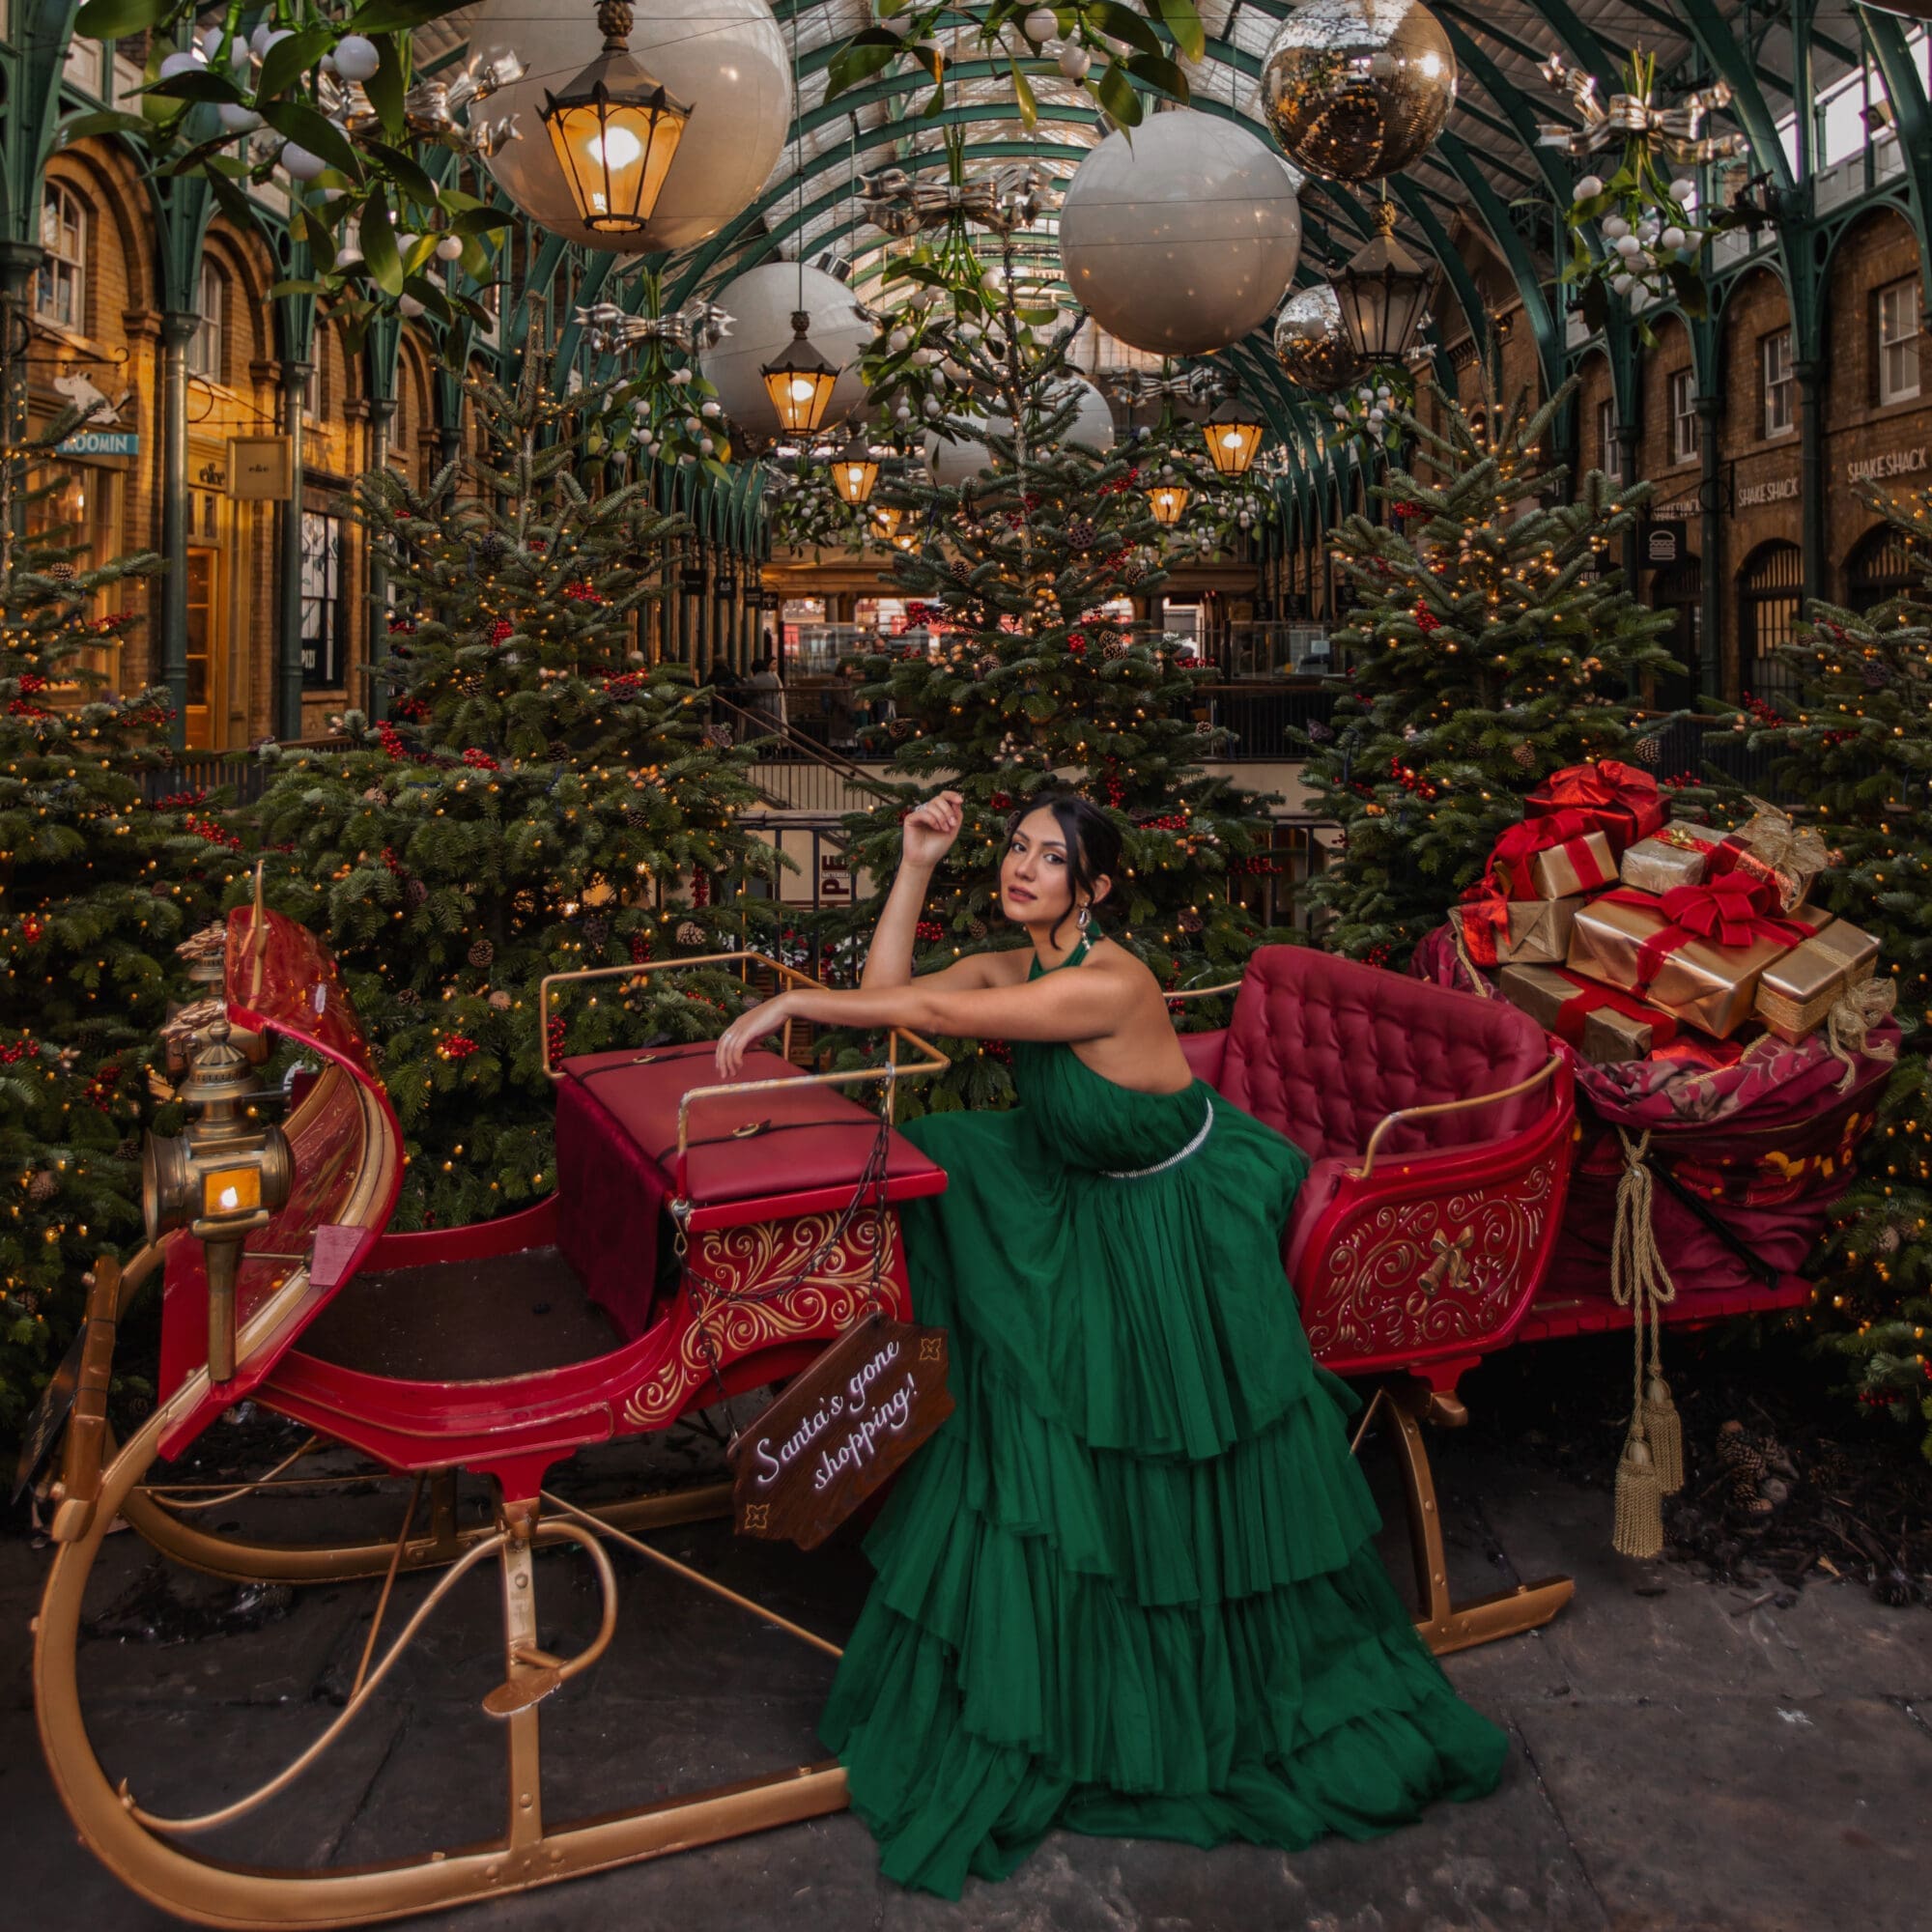 Covent Garden Piazza Christmas in London Display Instagram Photo Opp Sleigh copy